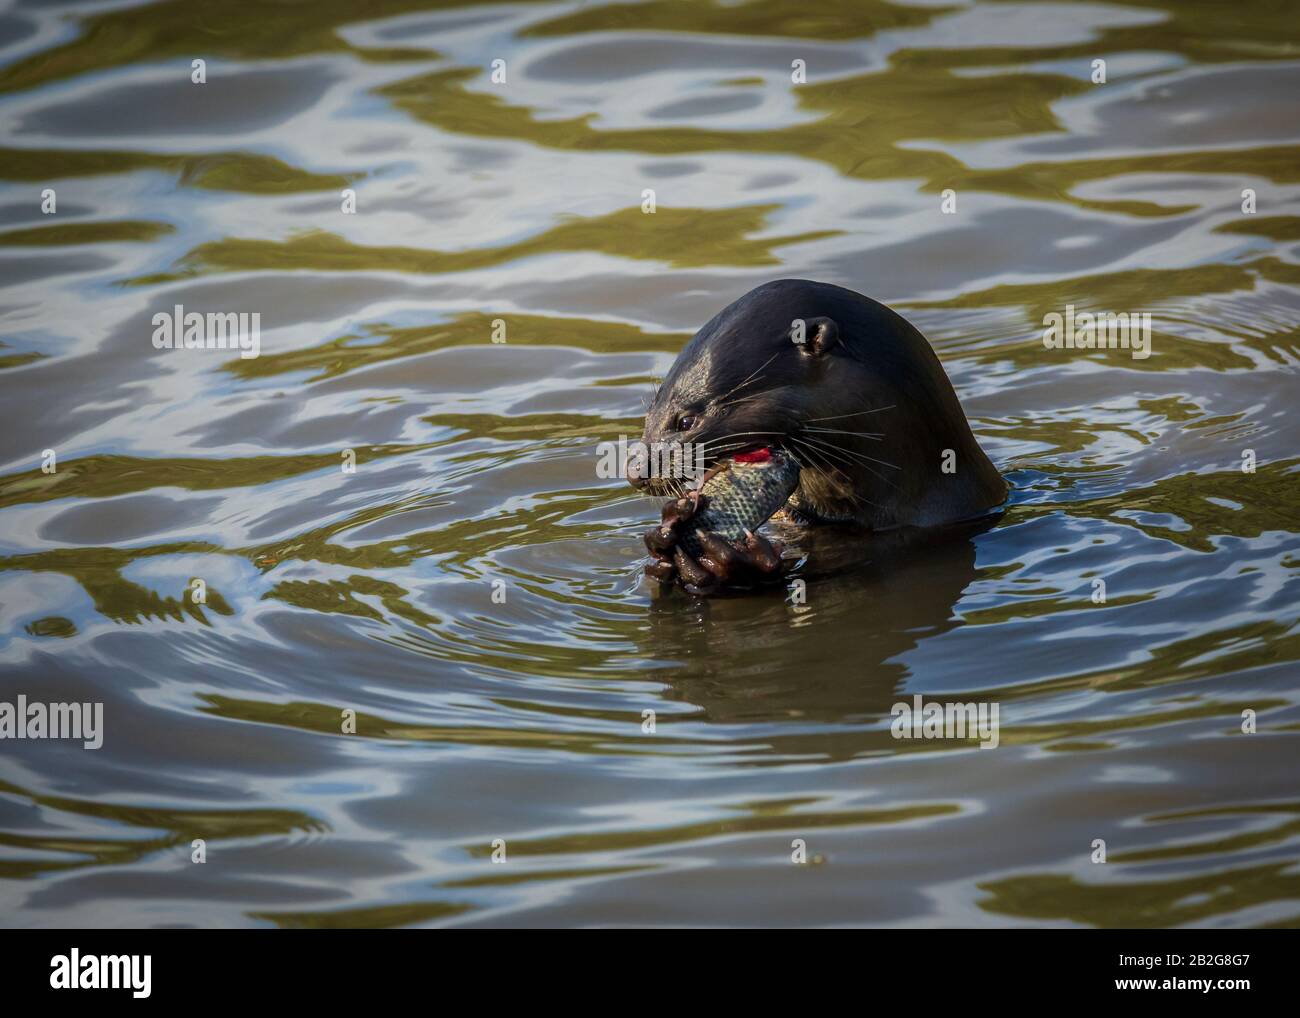 A single otter eating a fish in Pasir Ris Park, Singapore Stock Photo